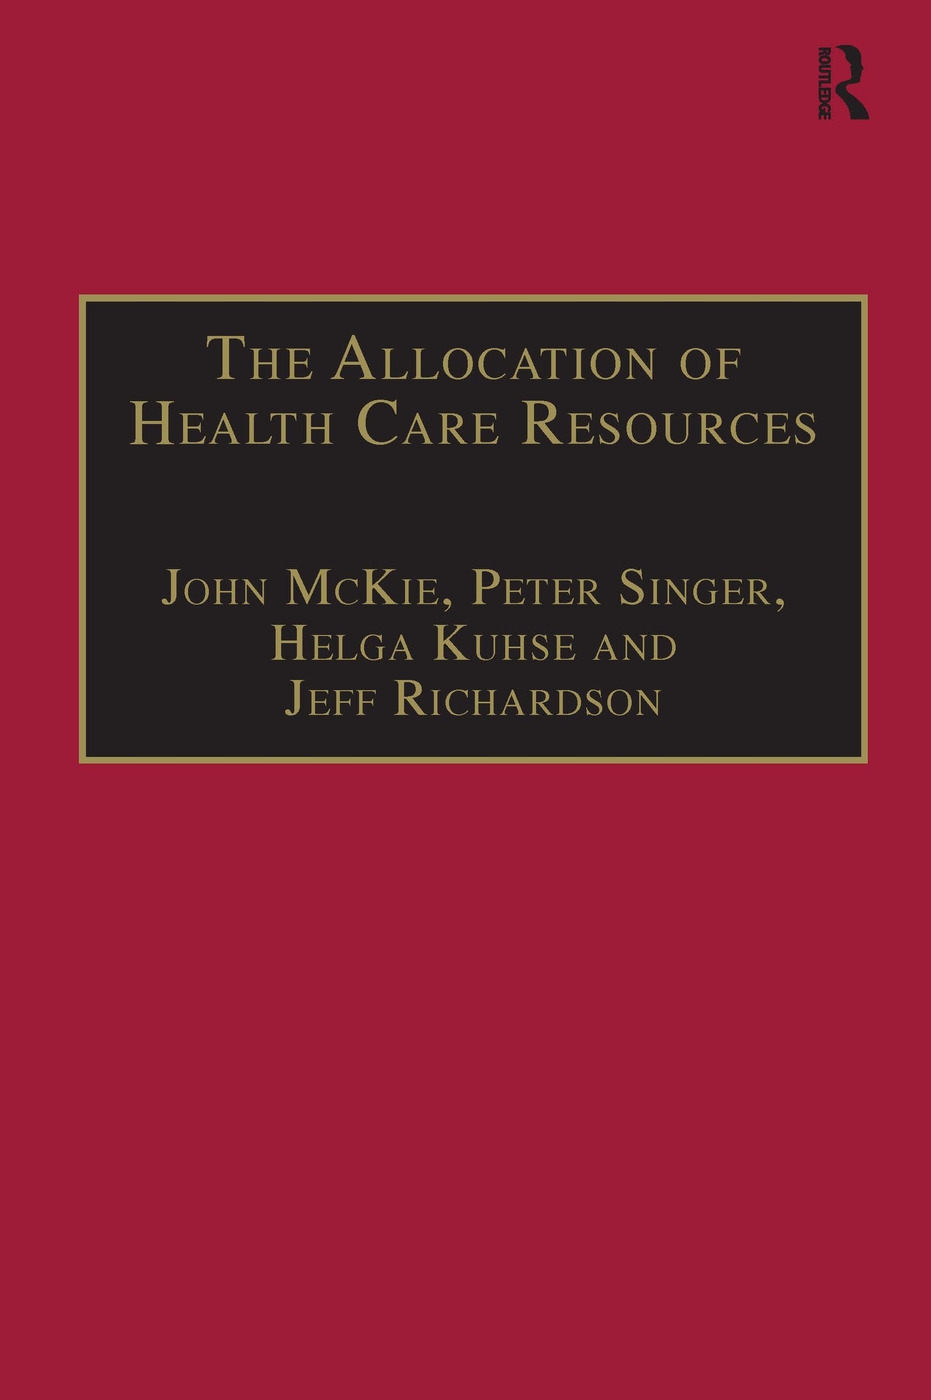 The Allocation of Health Care Resources: An Ethical Evaluation of the ’Qaly’ Approach